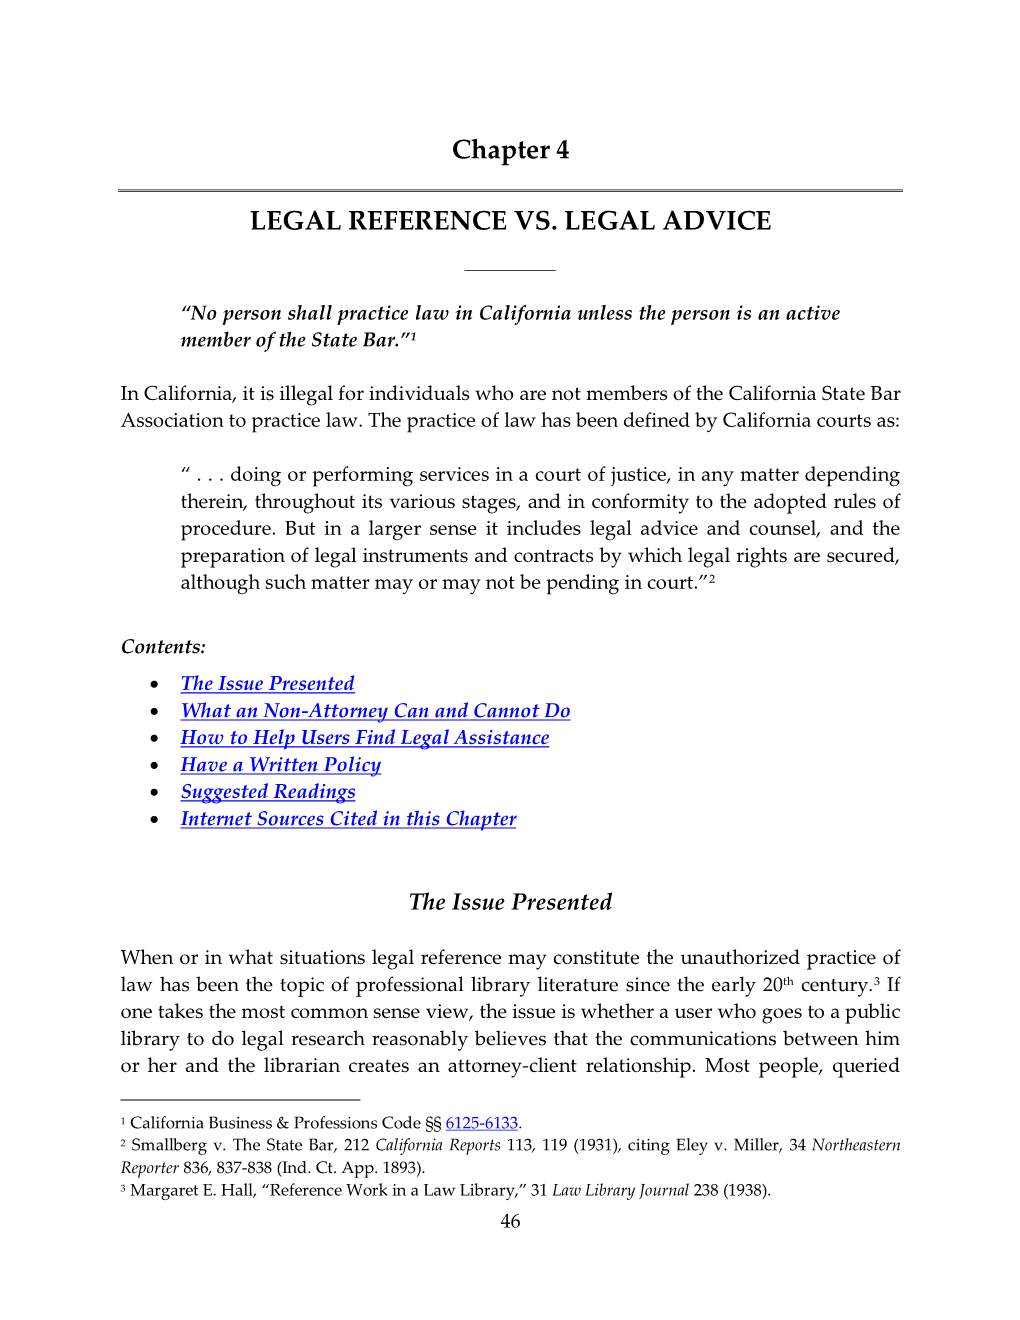 Chapter 4 LEGAL REFERENCE VS. LEGAL ADVICE